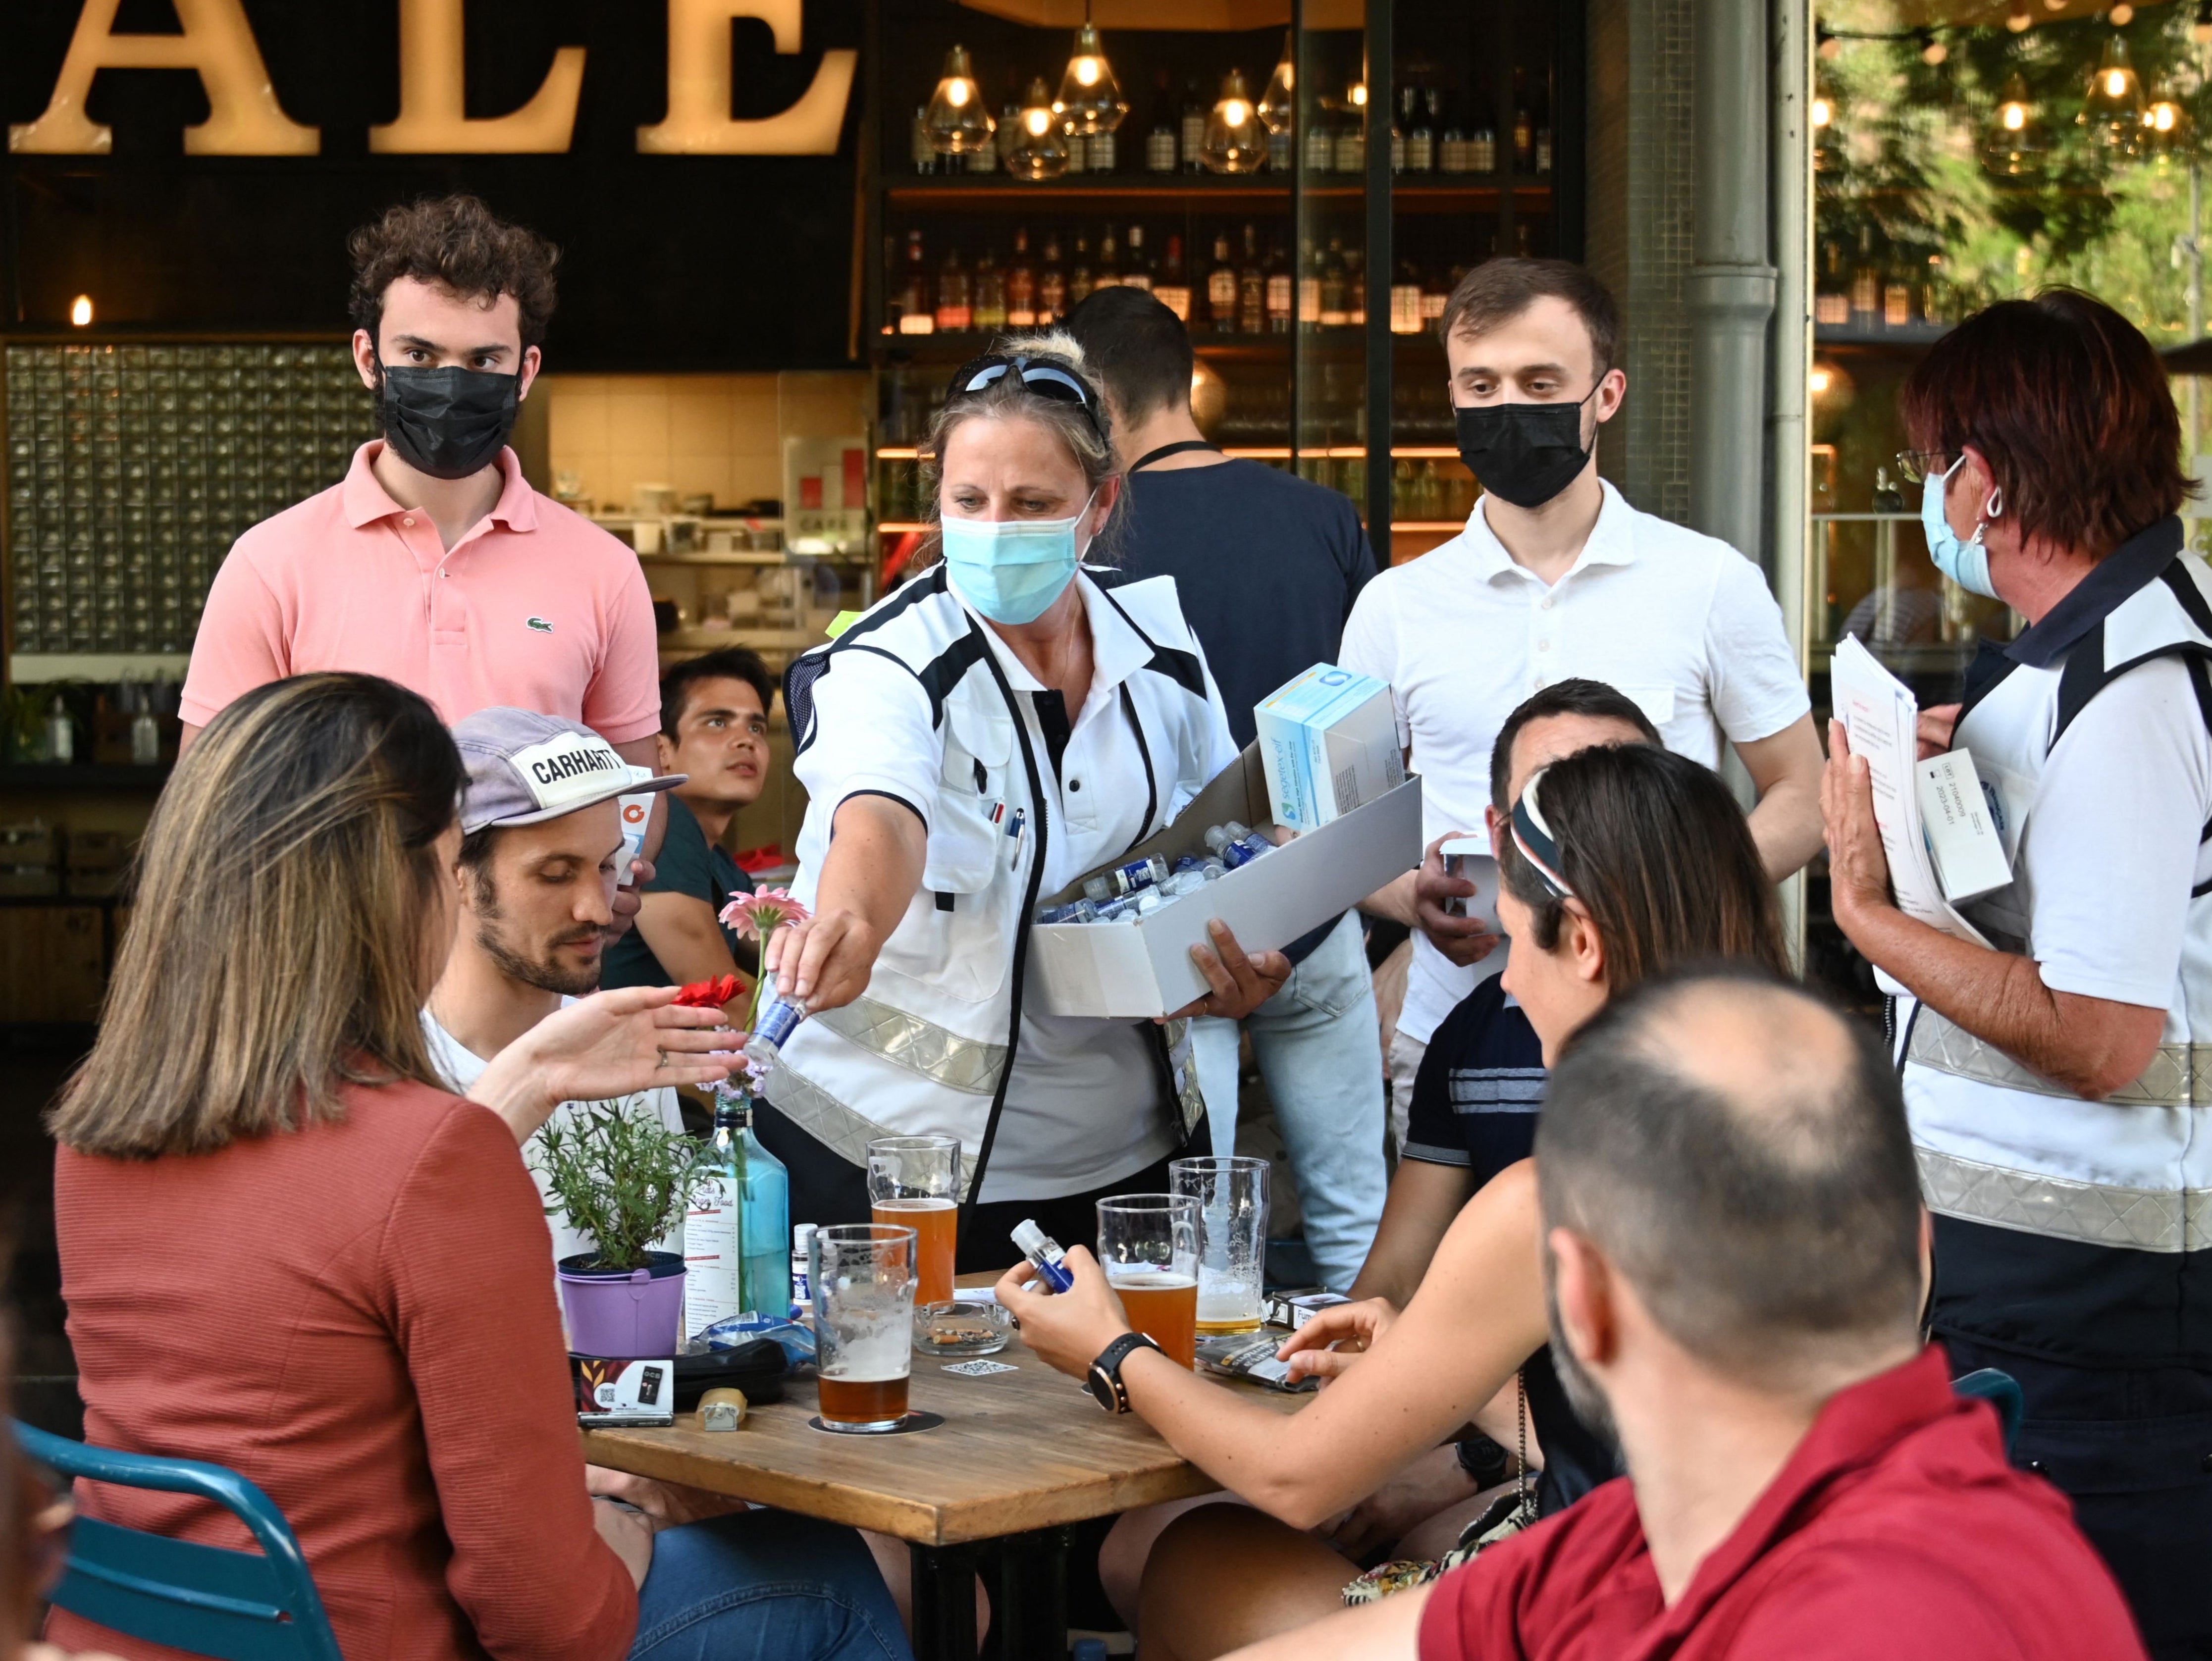 Anti-Covid mediators deliver hand sanitiser to customers on a bar terrace in Strasbourg